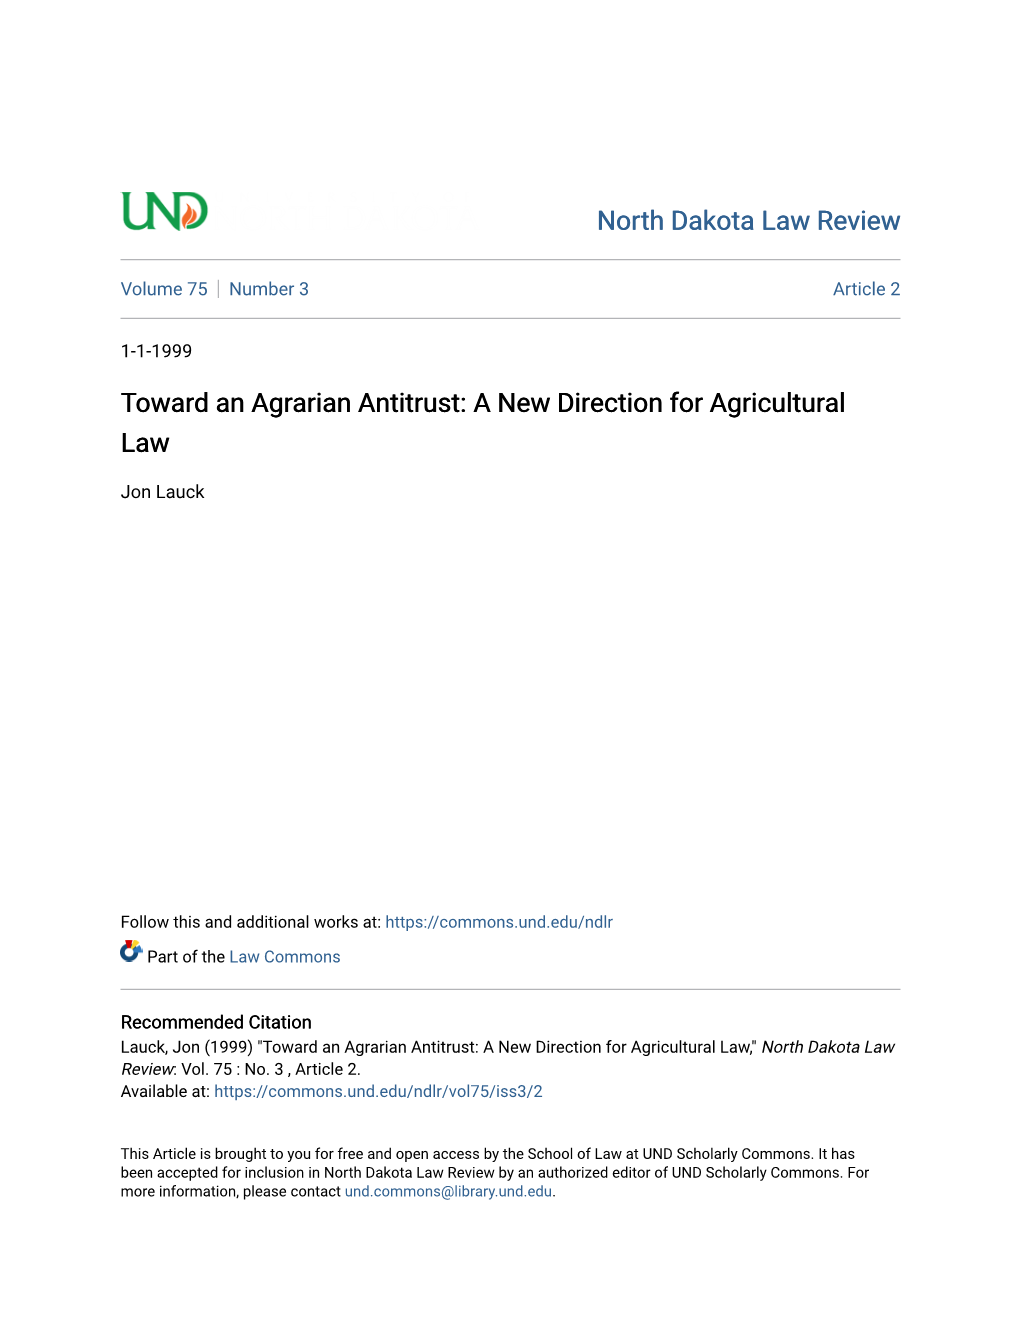 Toward an Agrarian Antitrust: a New Direction for Agricultural Law